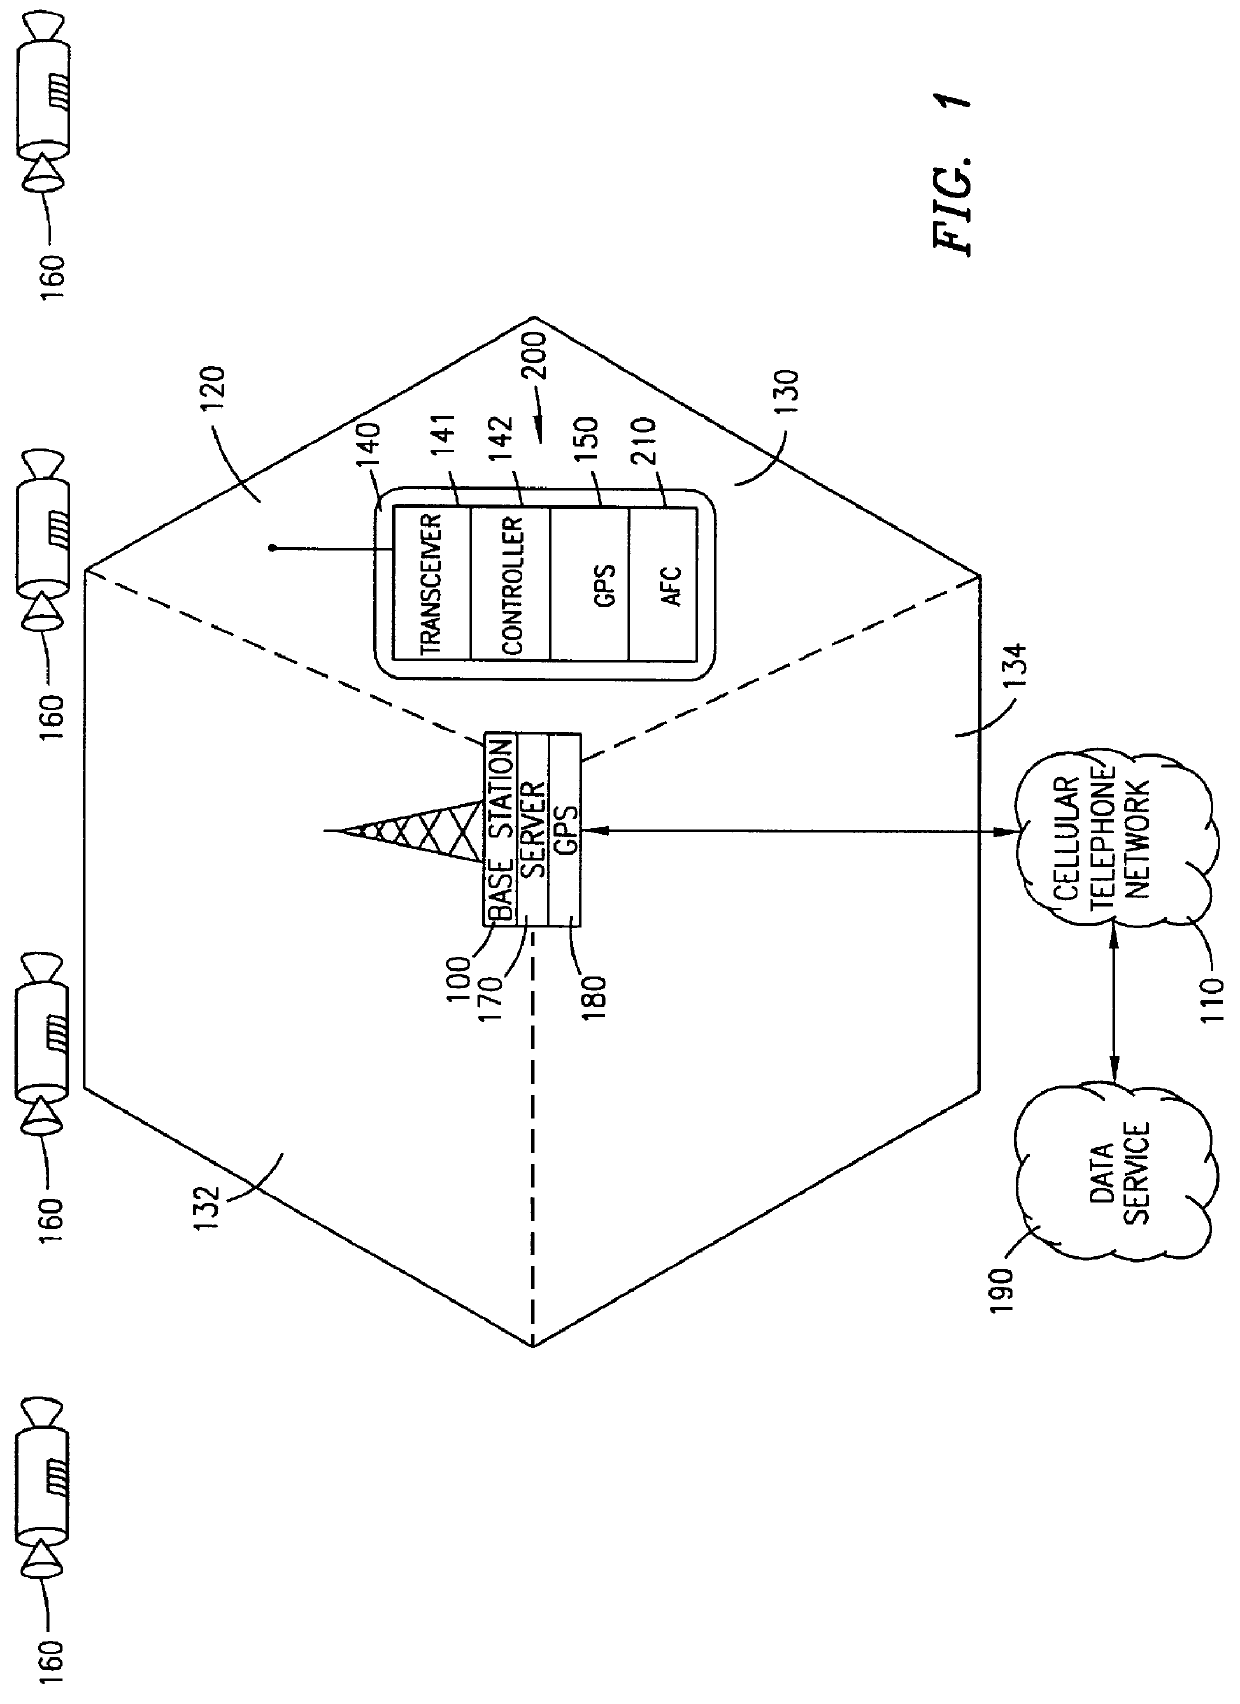 Reduced global positioning system receiver code shift search space for a cellular telephone system